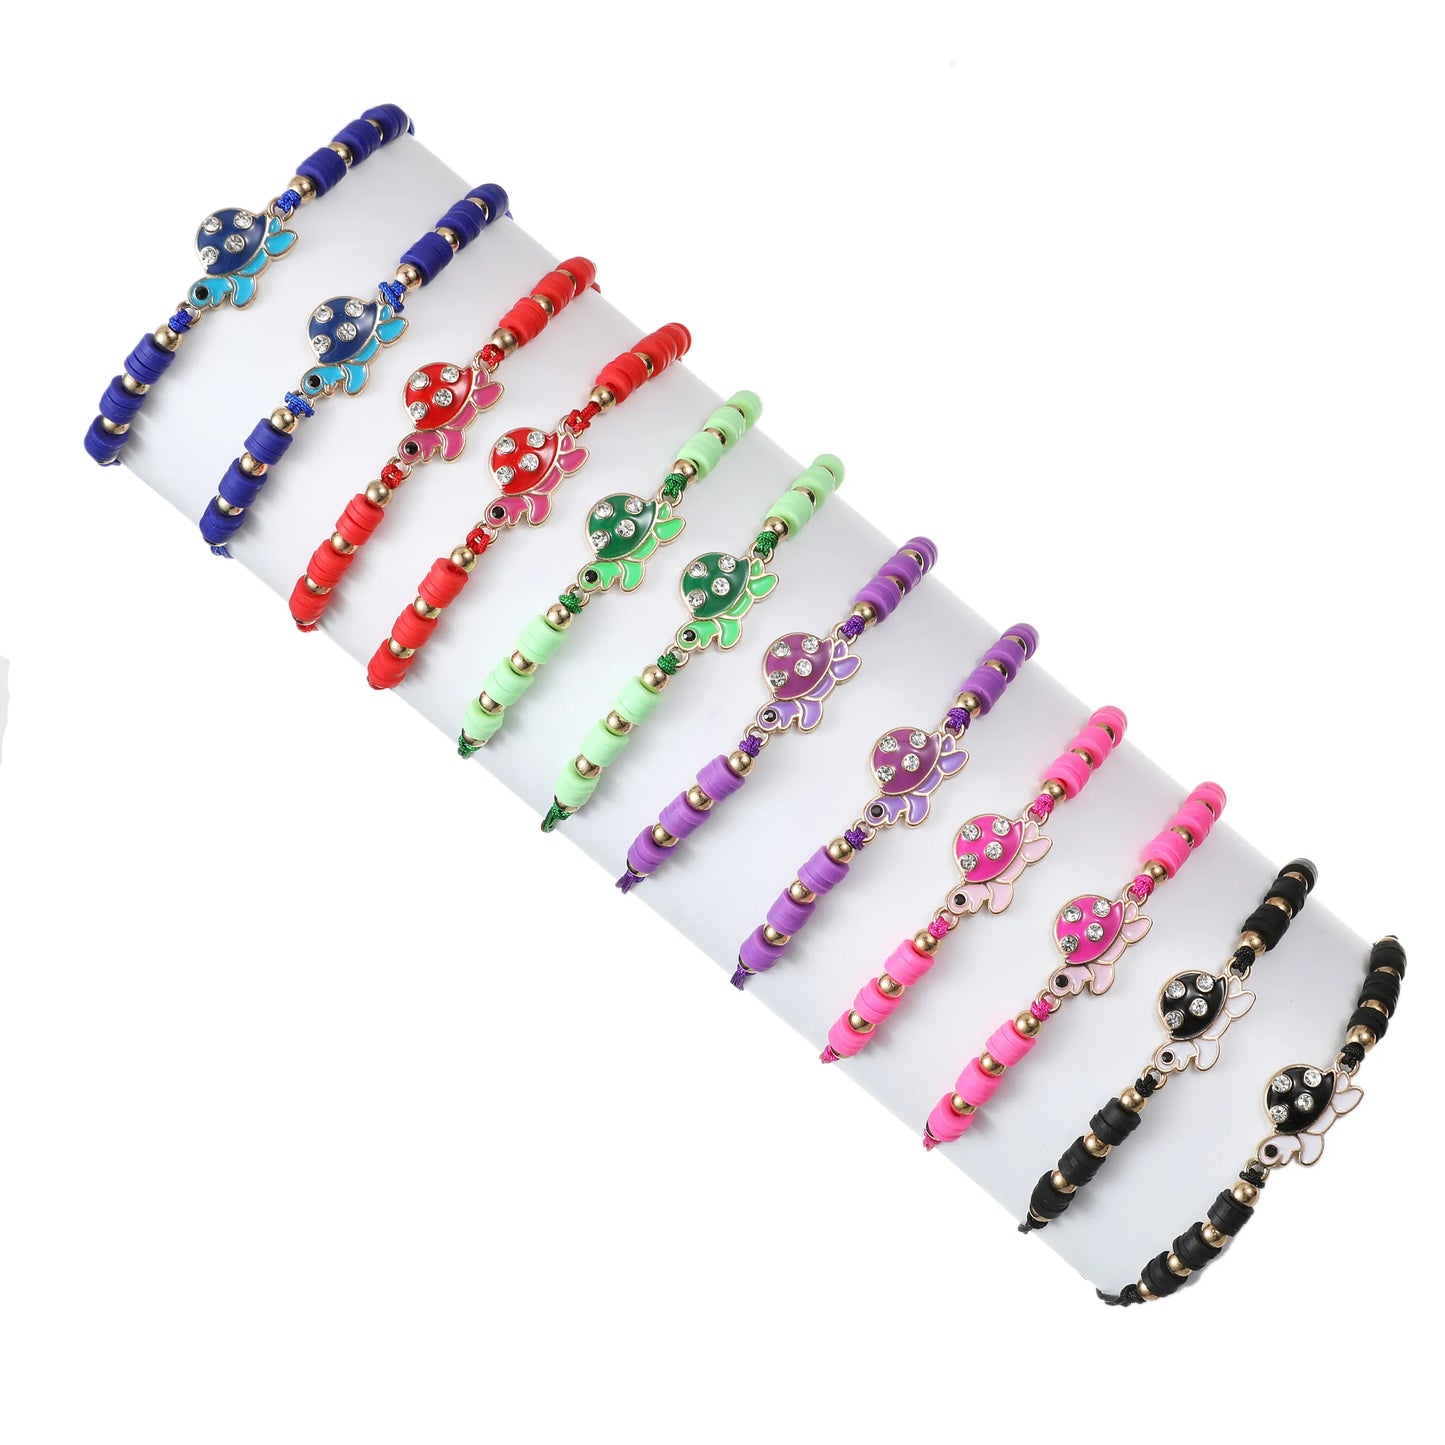 12pc/lot Handmade Woven Rope Chain Turtle Bracelet Colored Polymer Clay Tablets Adjustable Bracelets for Girls Cuff Jewelry